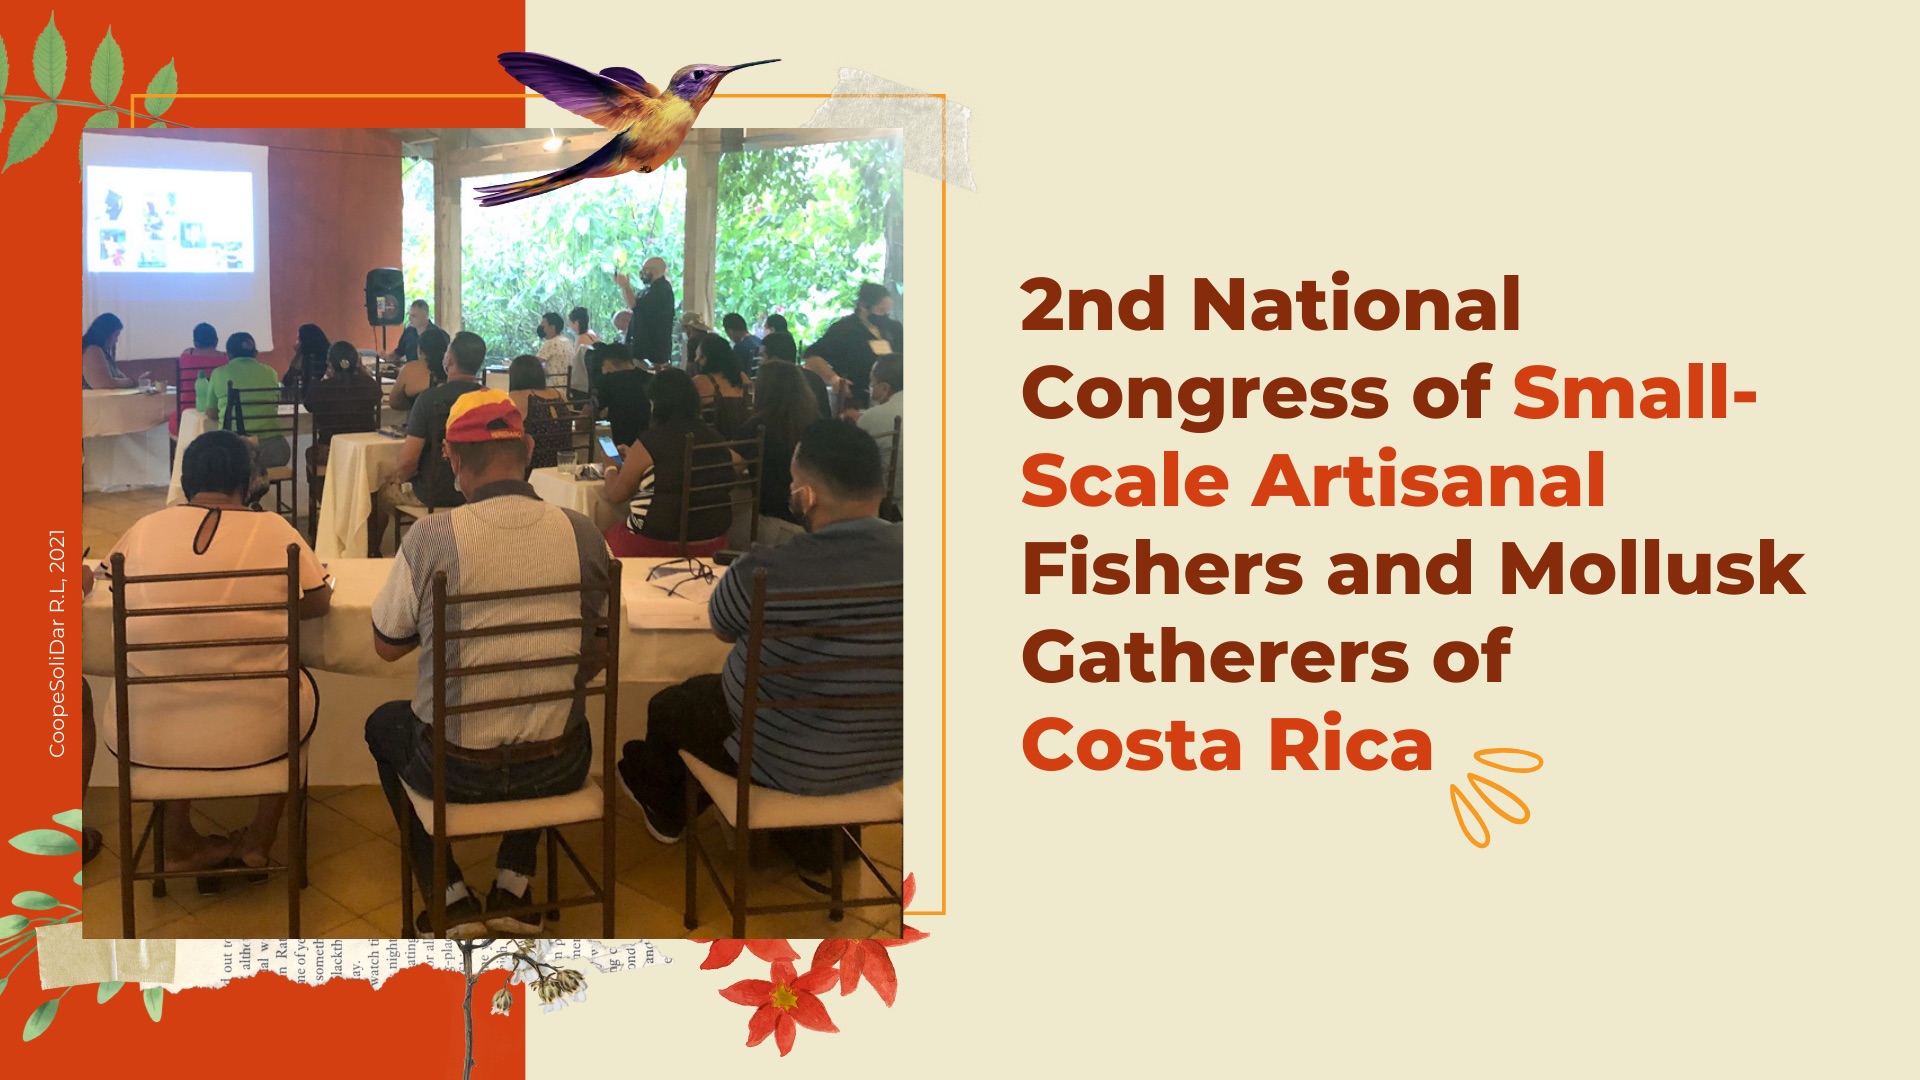 2nd National Congress of Small-Scale Artisanal Fishers and Mollusk Gatherers of Costa Rica